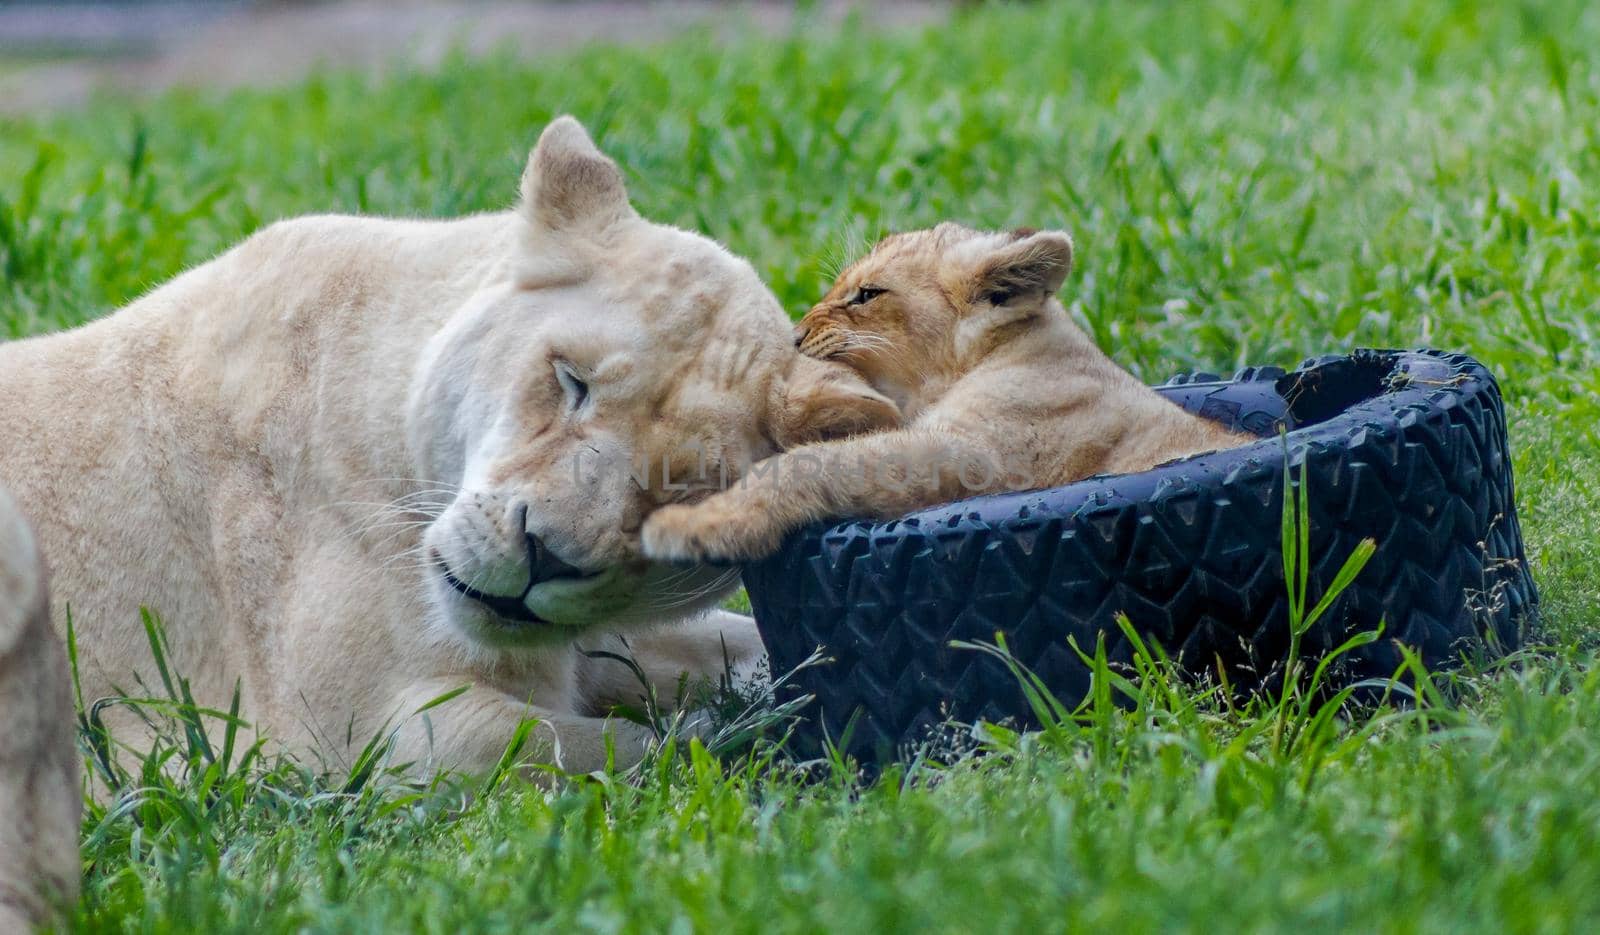 Lion mother and cub playing togehter in a zoo by bettercallcurry